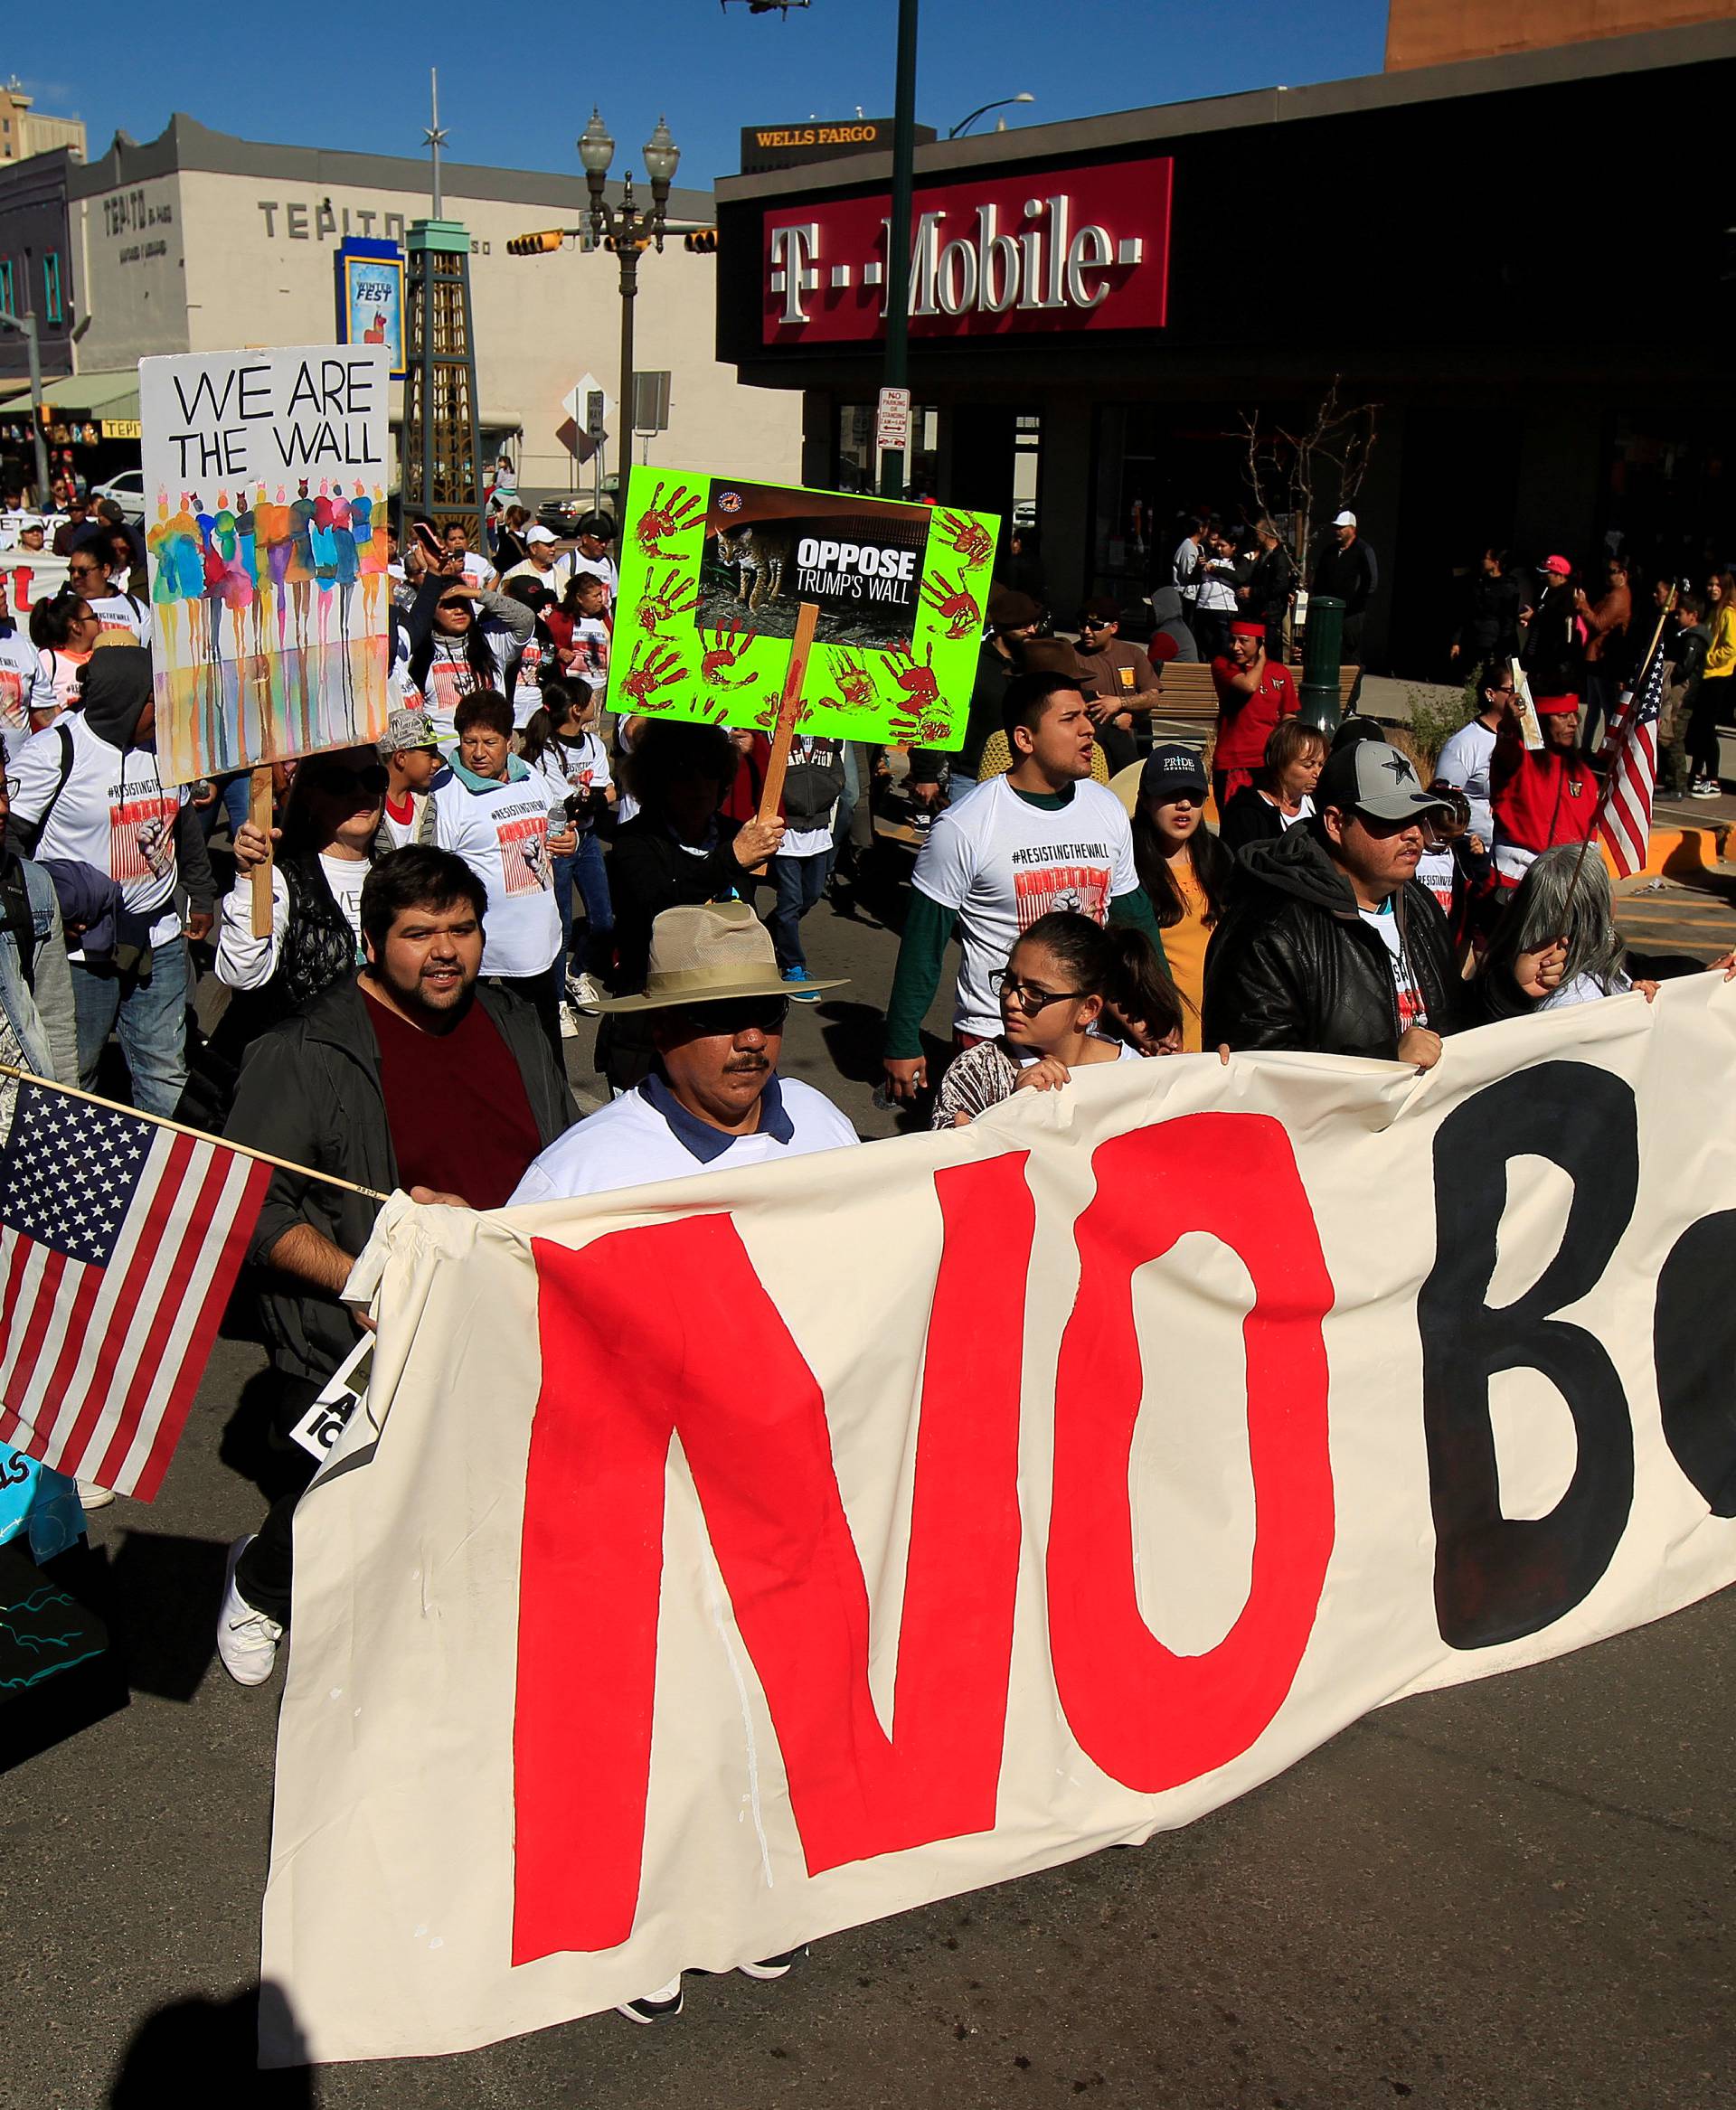 FILE PHOTO: Members of Border Network for Human Rights hold a march to protest against U.S. President Donald Trump's proposed wall, in El Paso